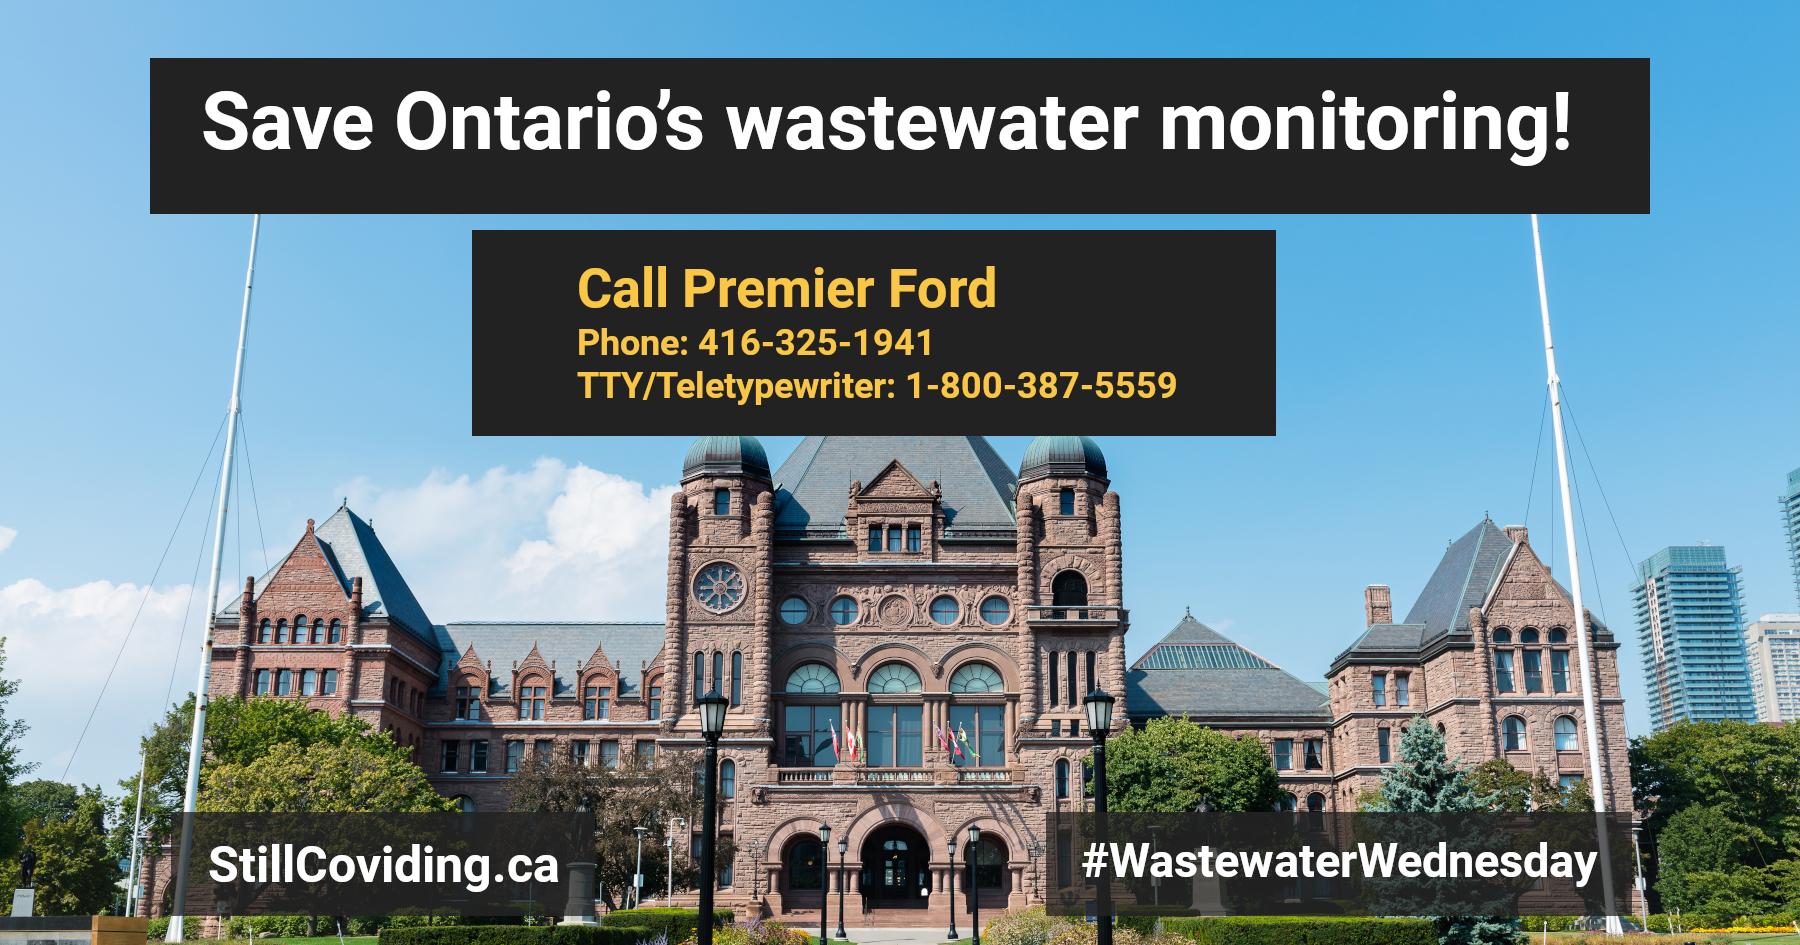 Photo of the Ontario Legislative Building, and the surrounding green lawn and trees. It is a sunny day, and the sky is blue with some clouds. Text reads: Save Ontario's wastewater monitoring! Call Premier Ford Phone: 416-325-1941 TTY/Teletypewriter: 1-800-387-5559 StillCOVIDing.ca #WastewaterWednesday